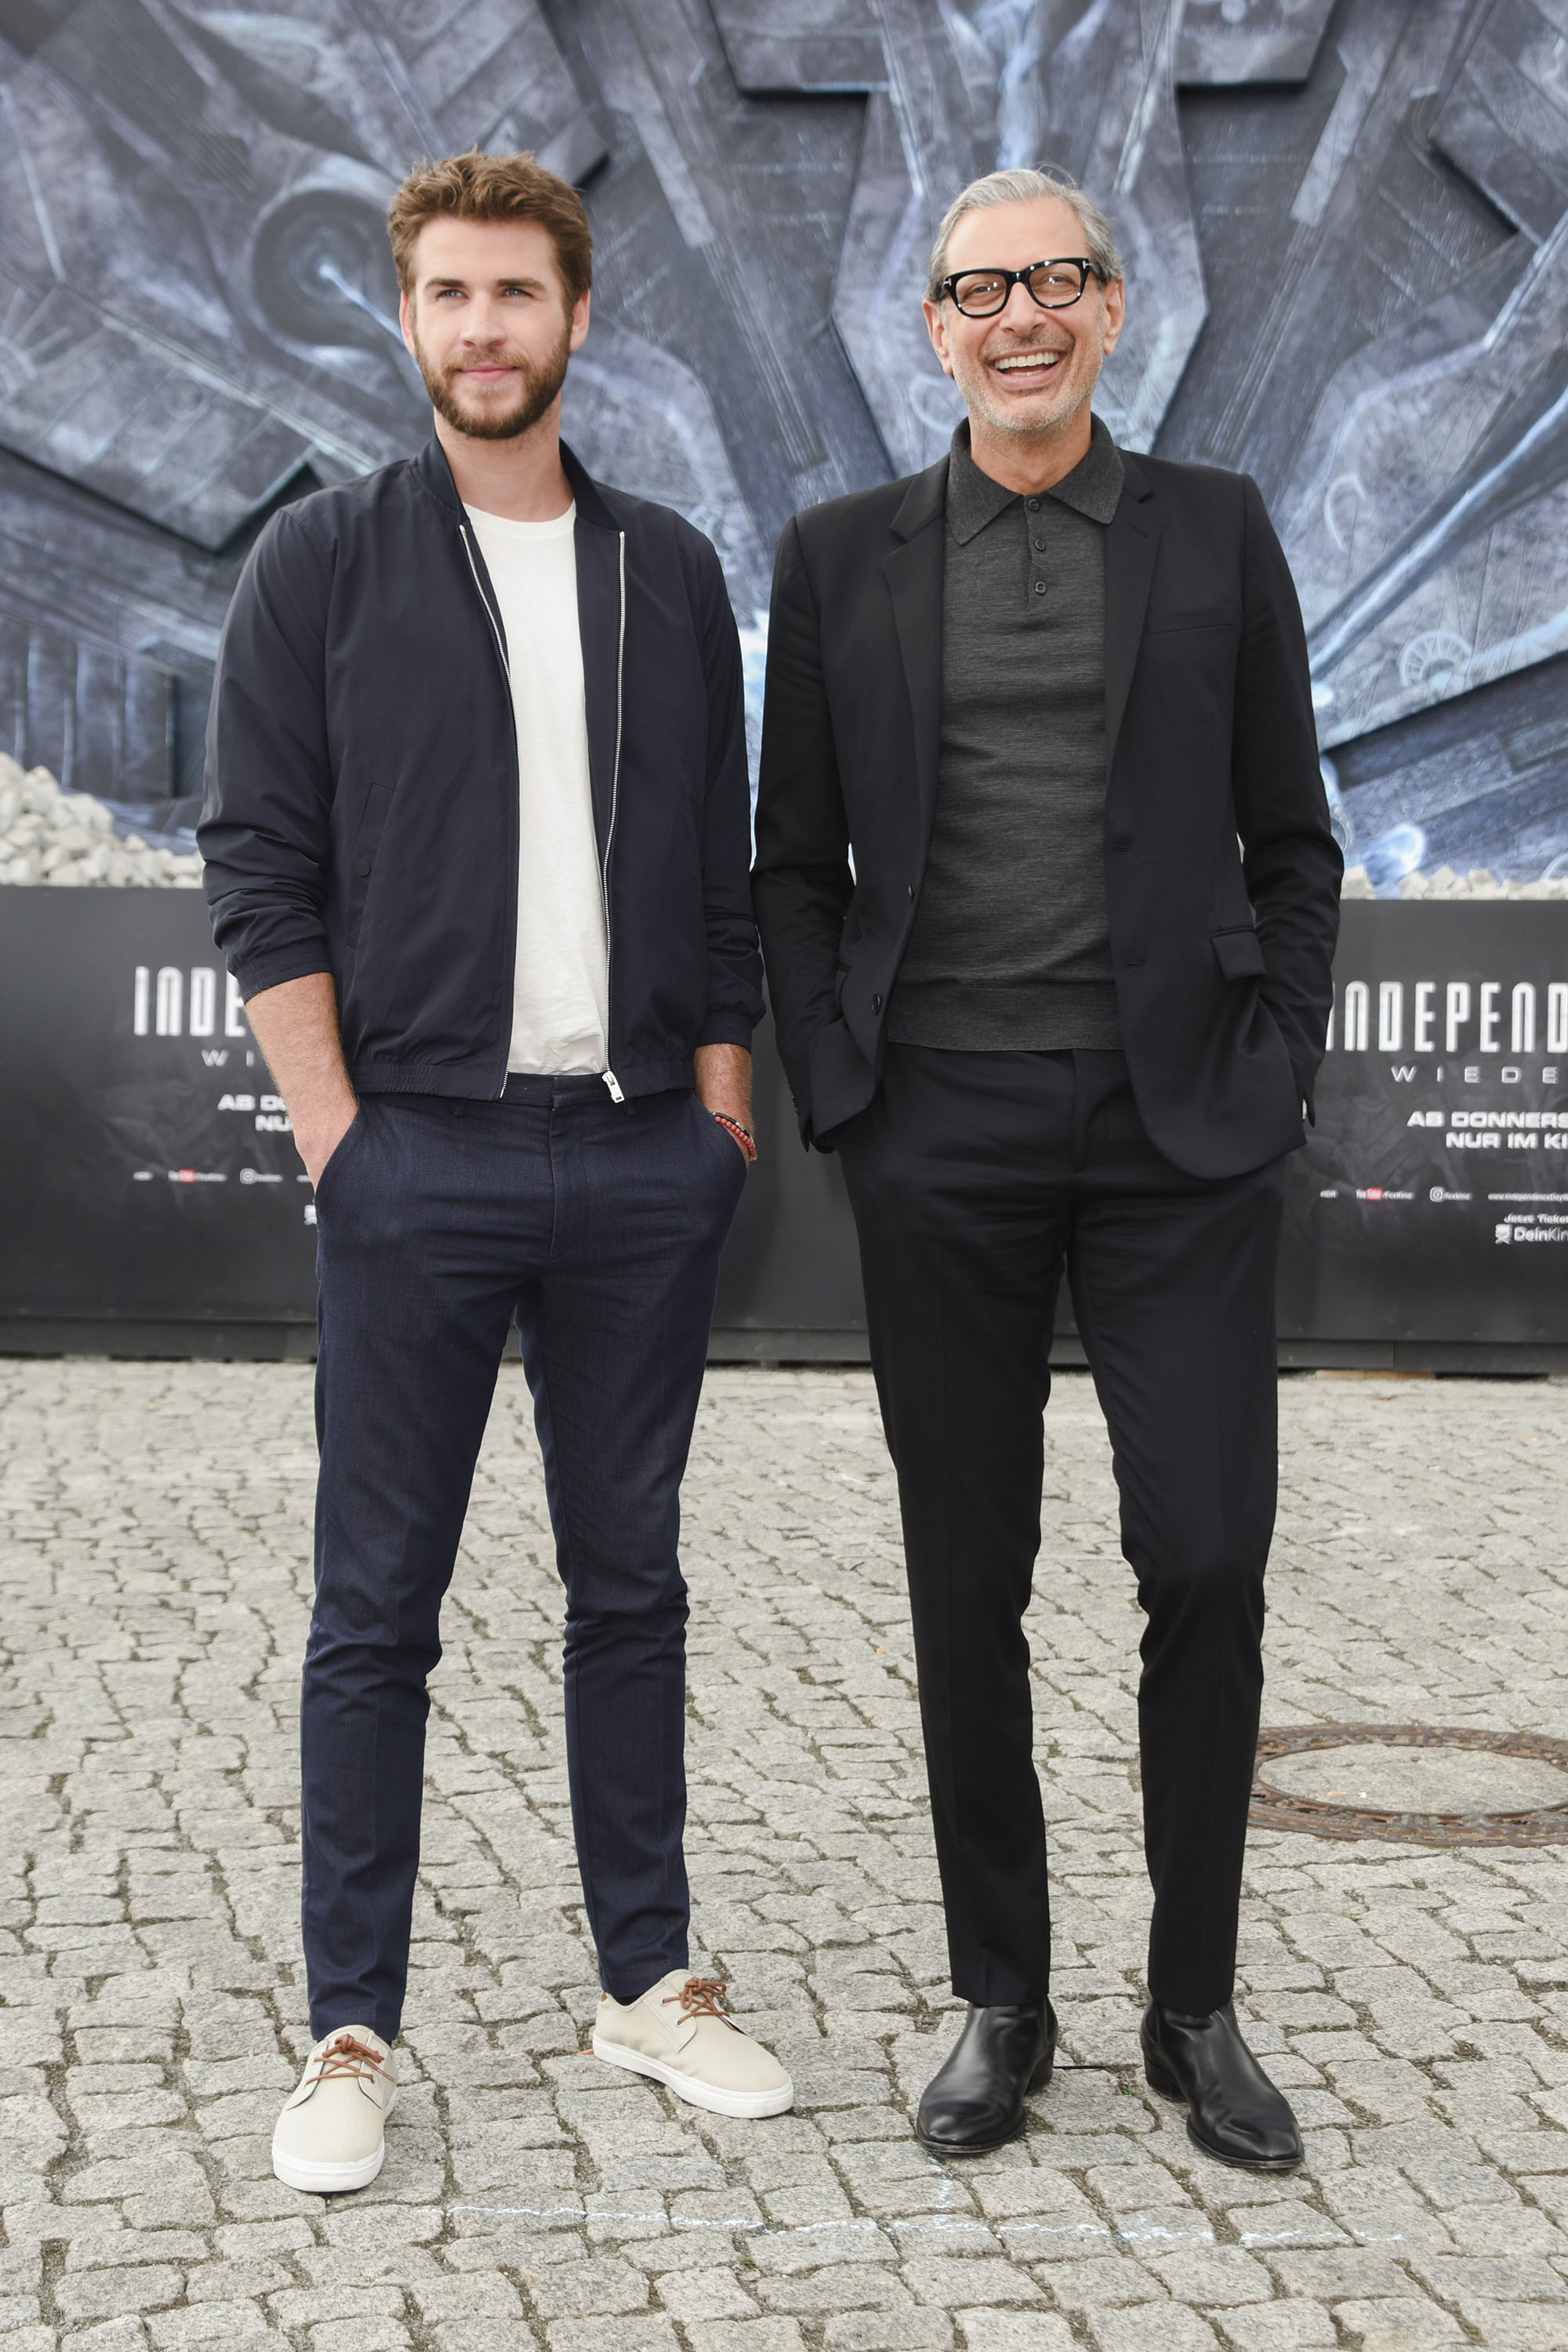 'Independence Day' Berlin Photo Call